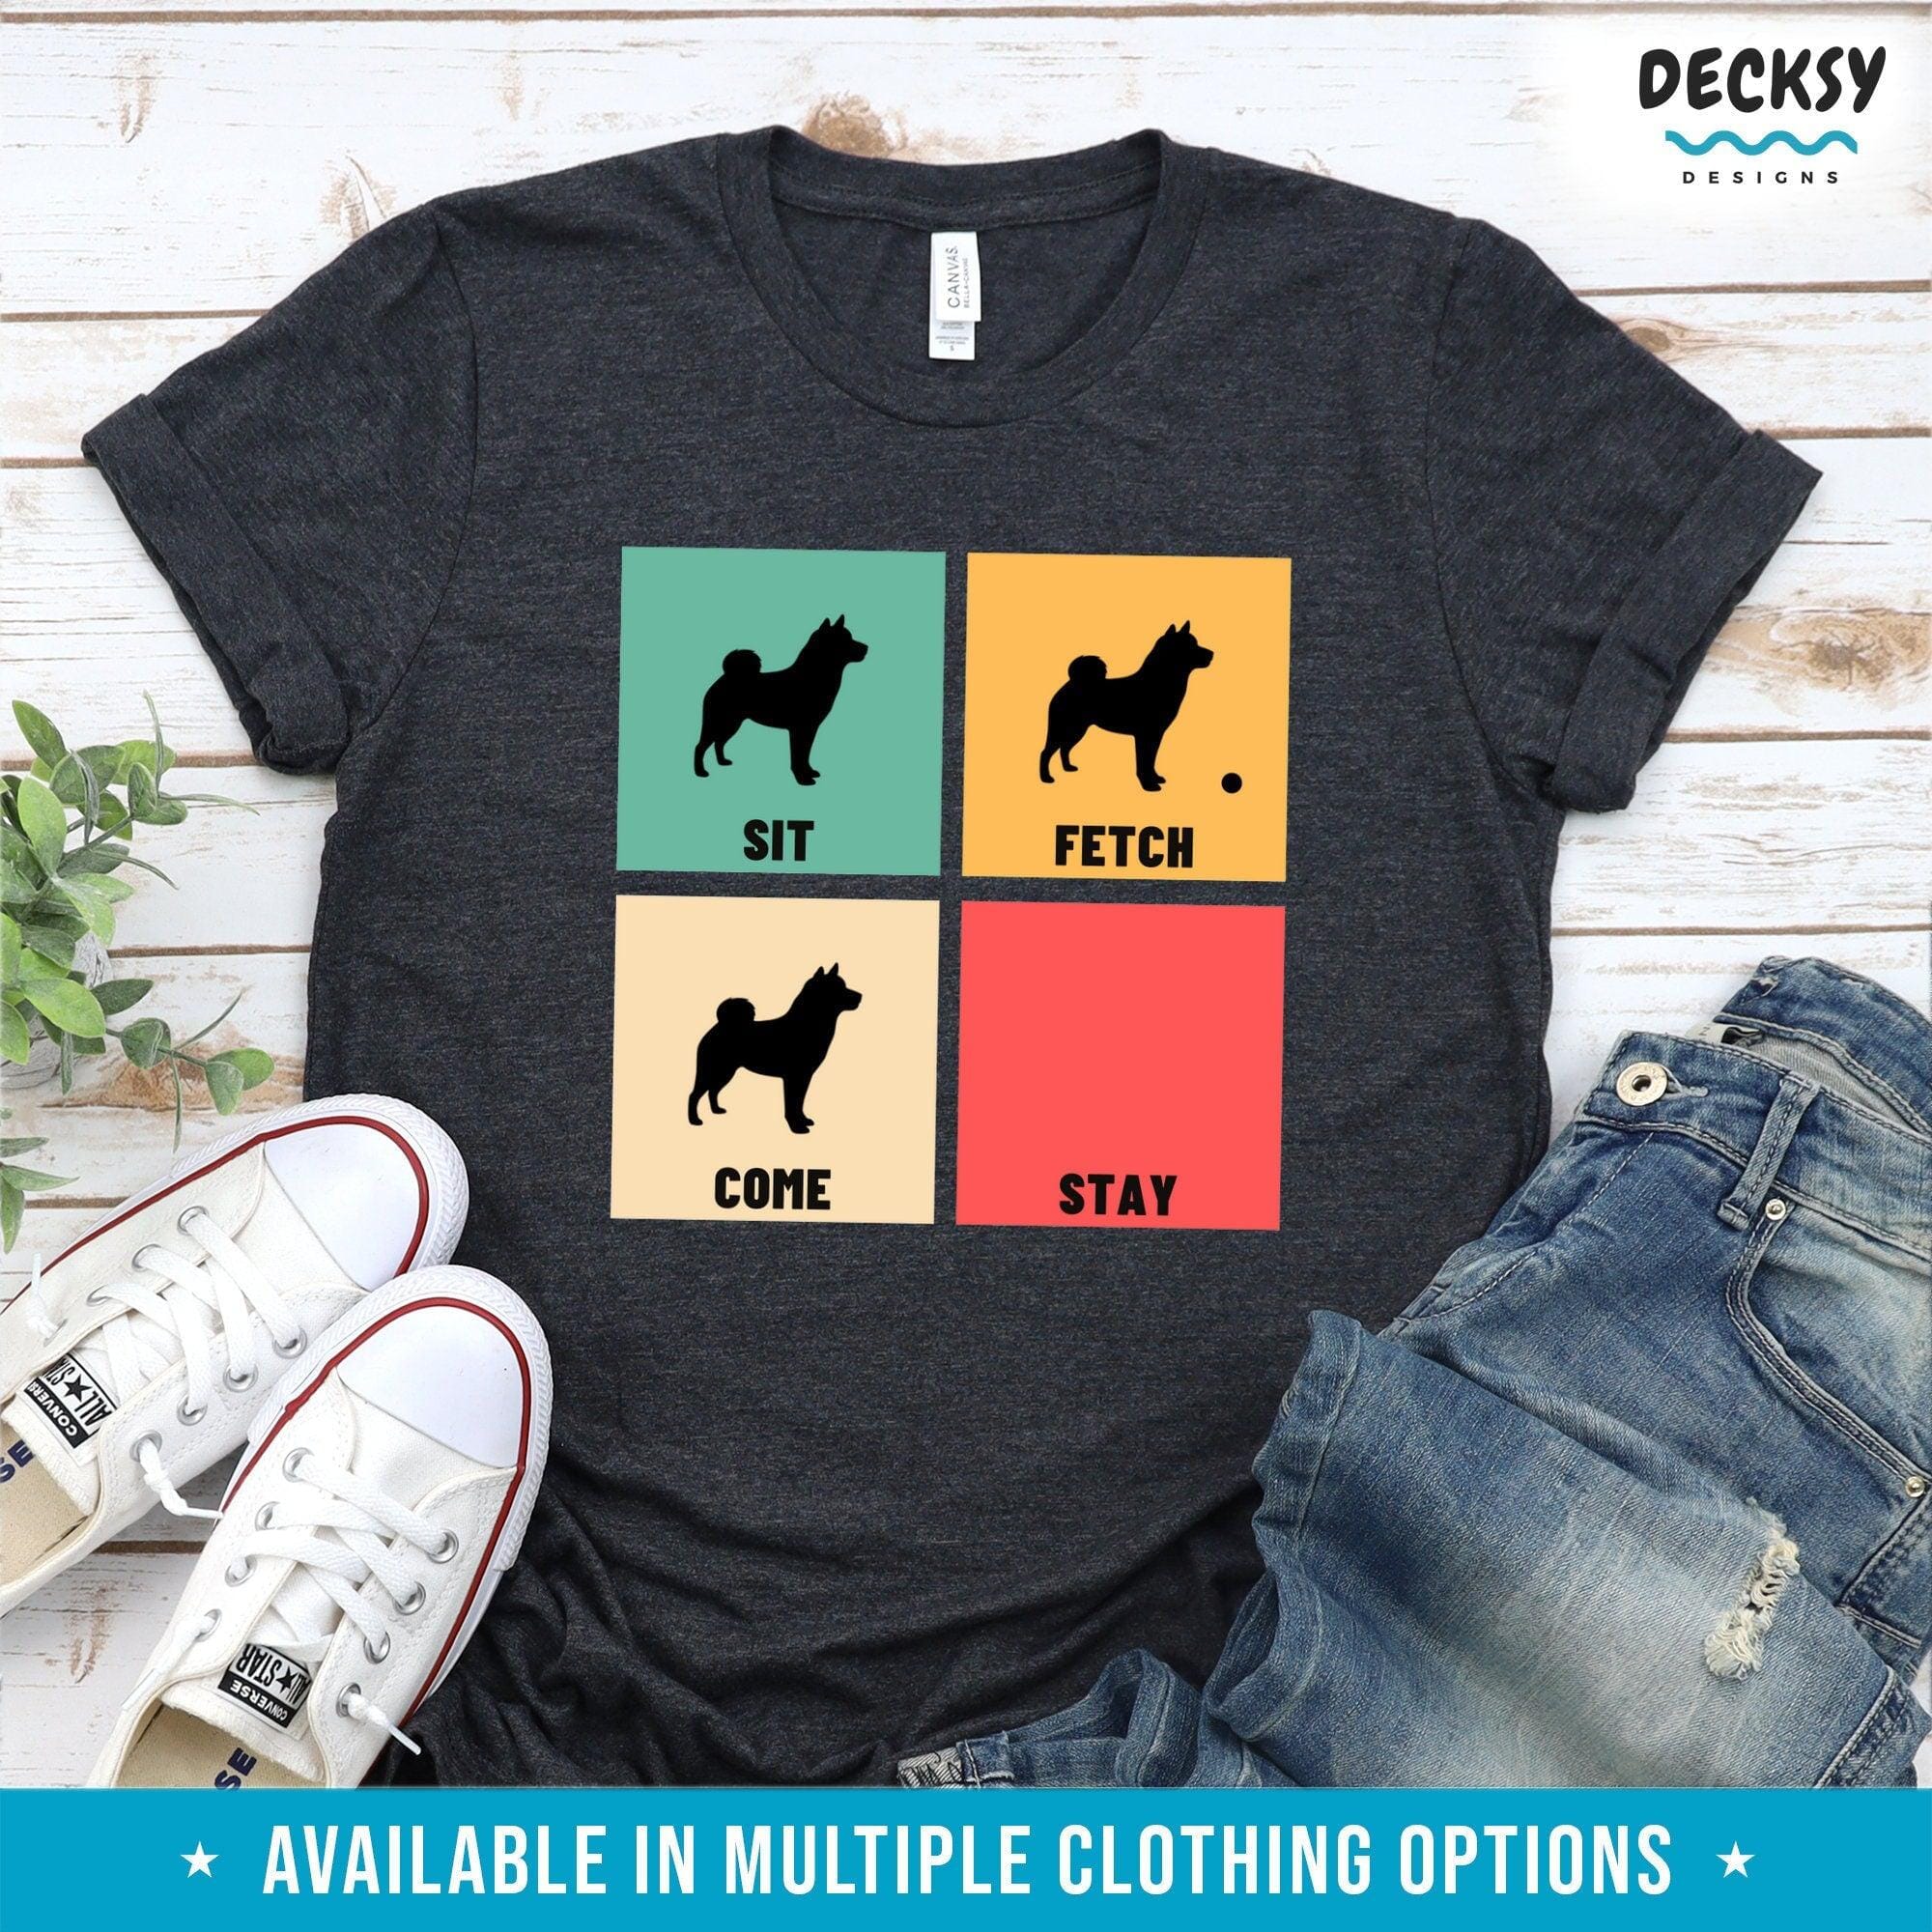 Shiba Inu Shirt, Funny Dog Lover Gift-Clothing:Gender-Neutral Adult Clothing:Tops & Tees:T-shirts:Graphic Tees-DecksyDesigns